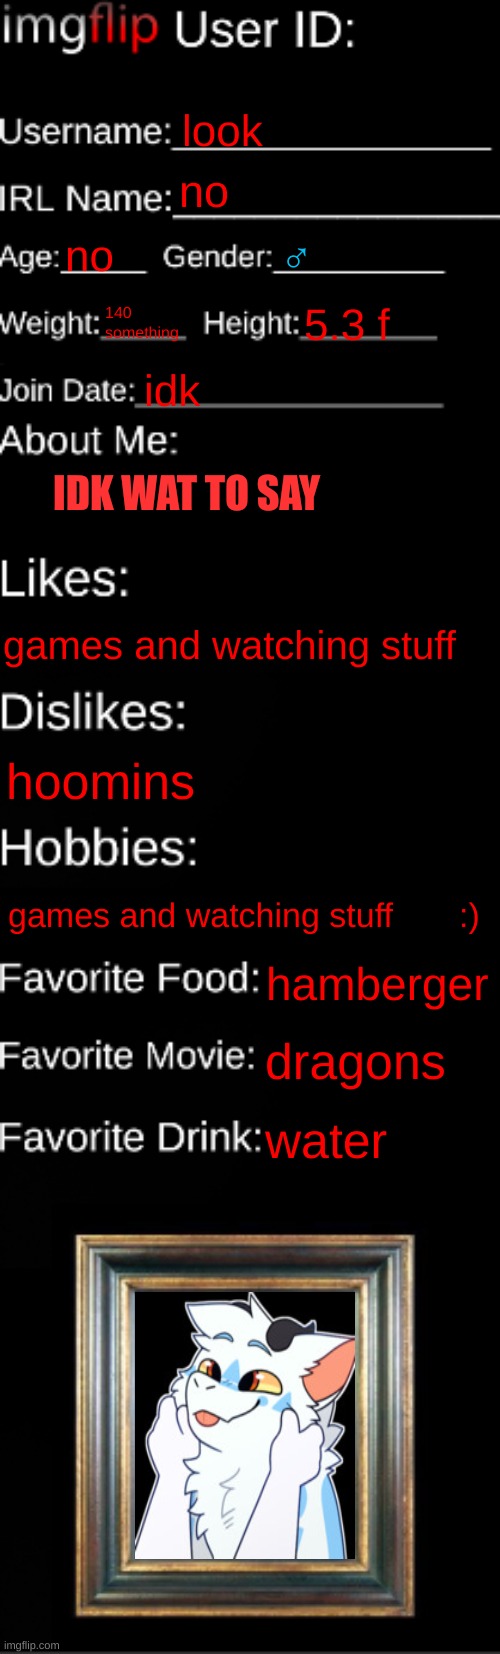 imgflip ID Card | look; no; no; ♂; 140 something; 5.3 f; idk; IDK WAT TO SAY; games and watching stuff; hoomins; games and watching stuff       :); hamberger; dragons; water | image tagged in imgflip id card | made w/ Imgflip meme maker